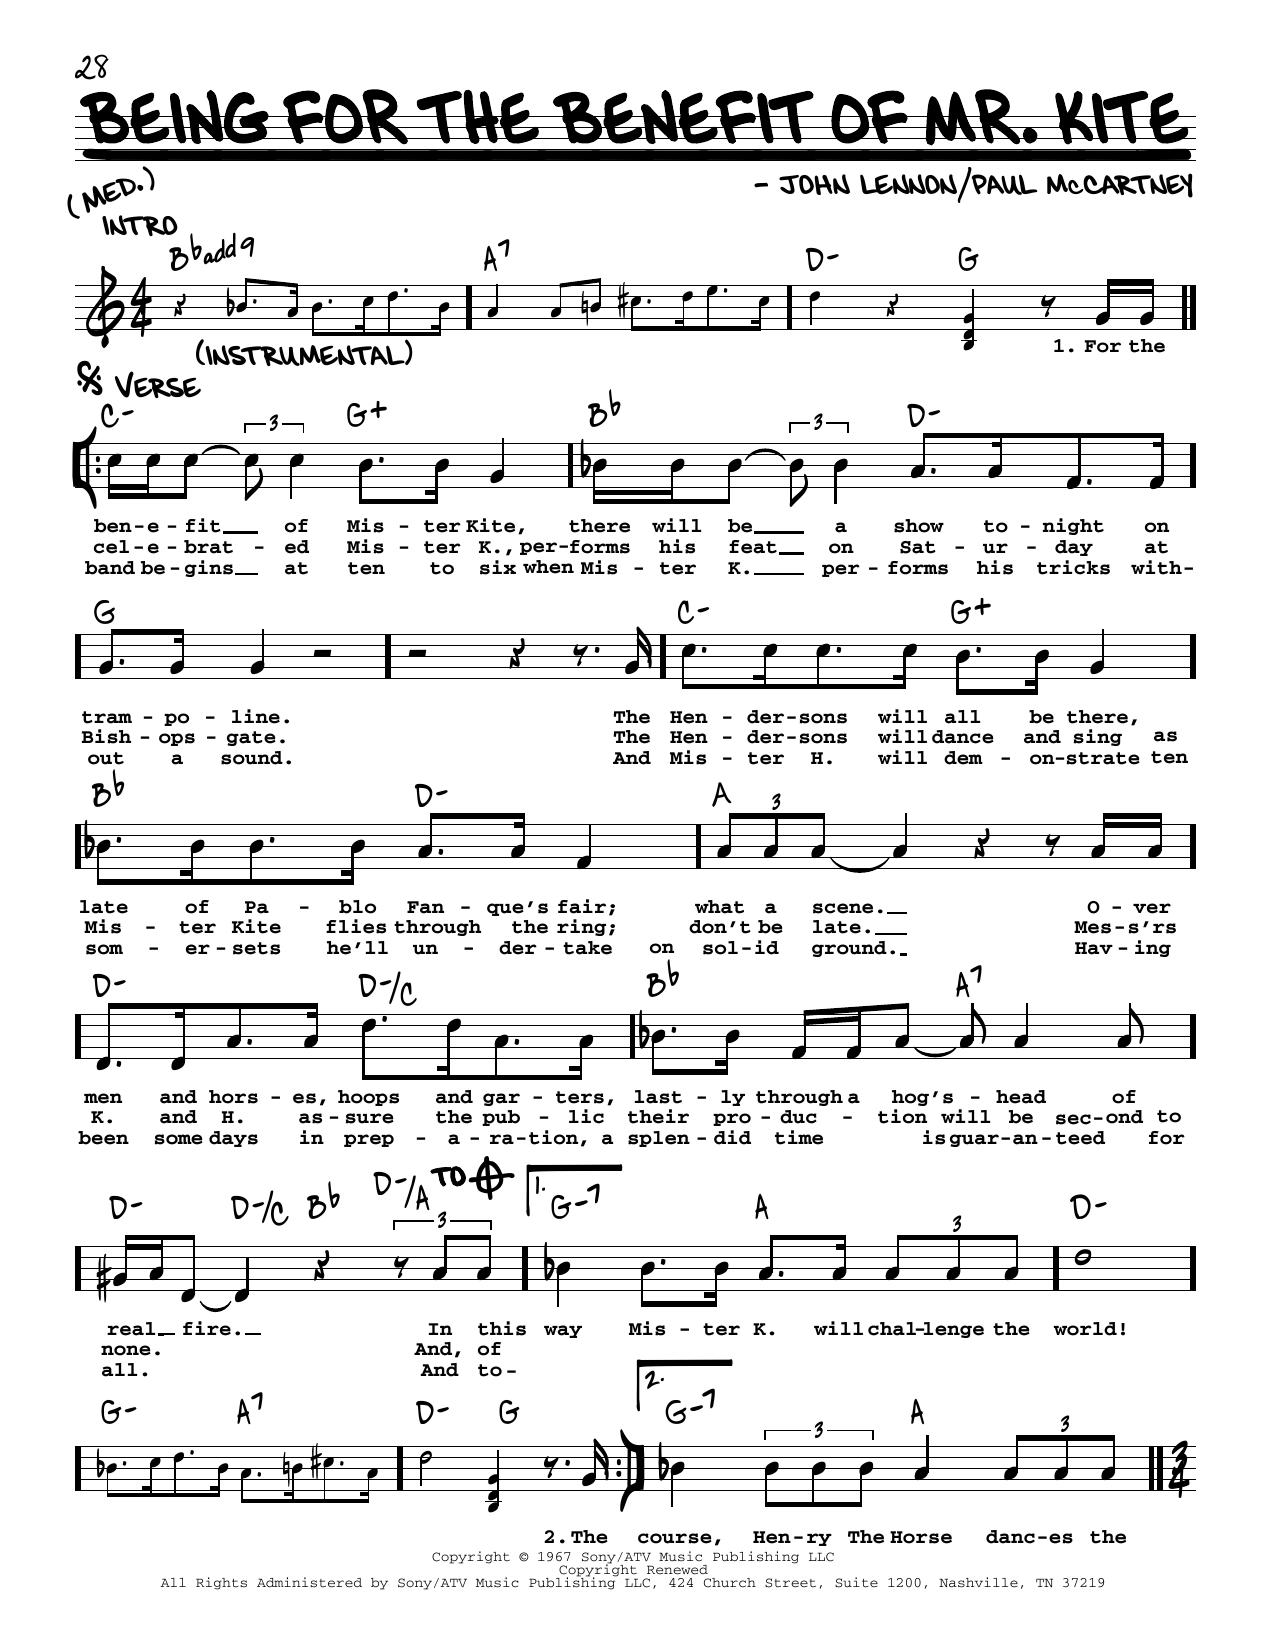 Download The Beatles Being For The Benefit Of Mr. Kite [Jazz Sheet Music